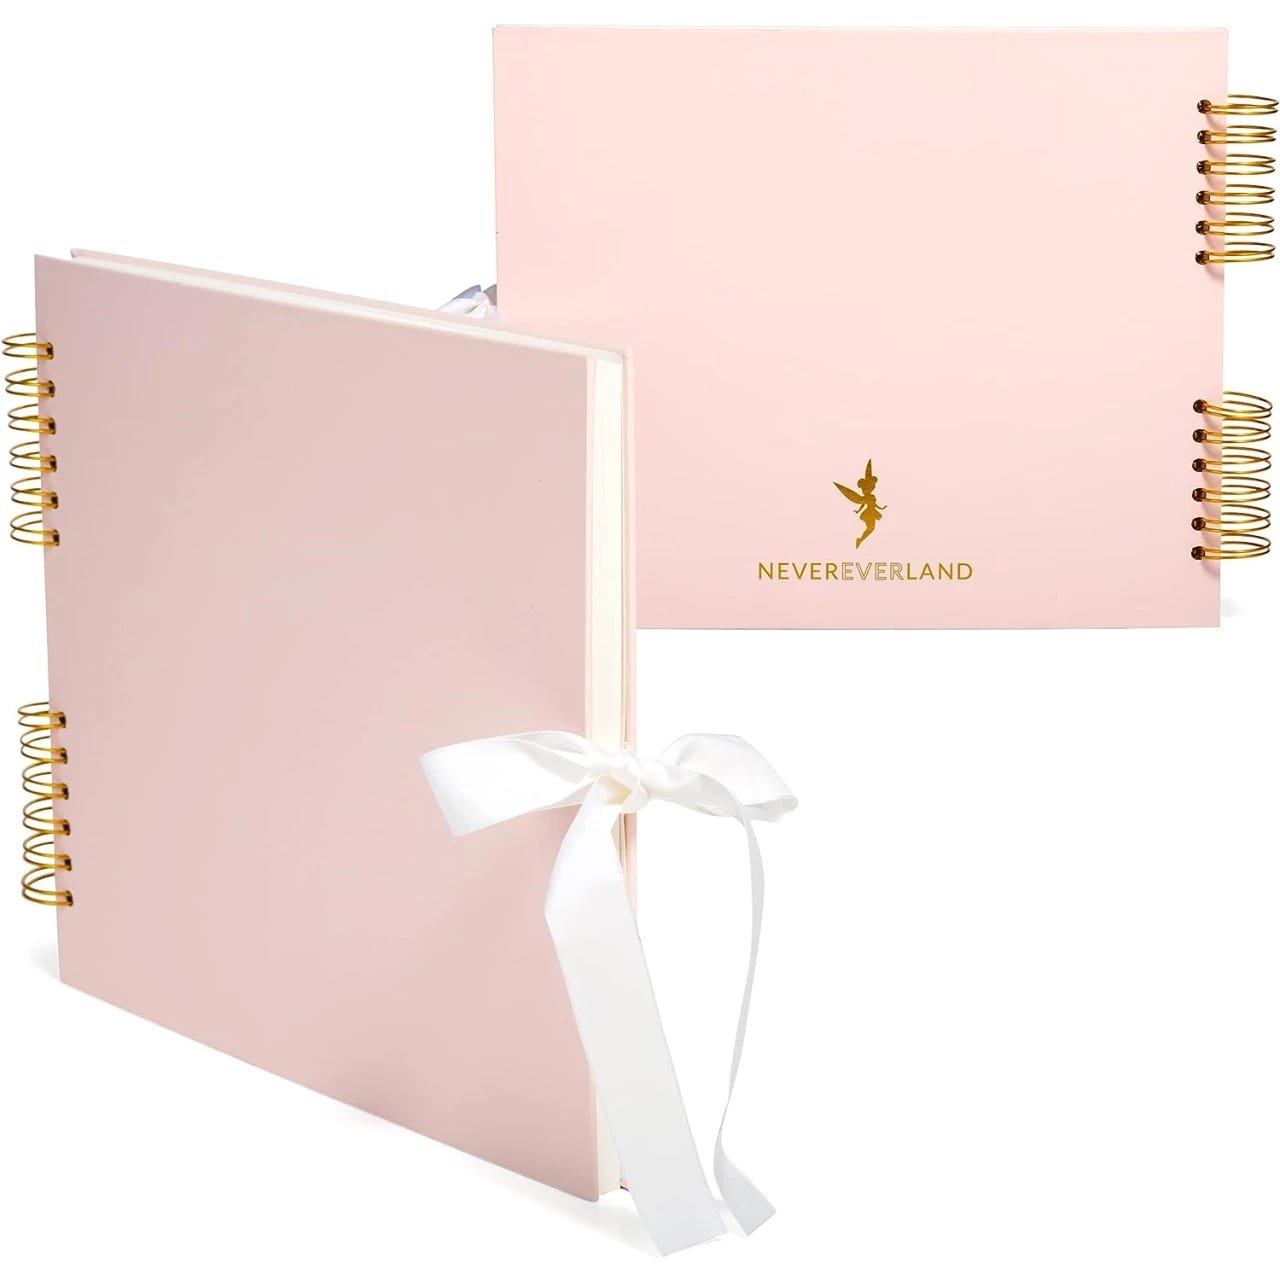  Lamare Wedding Guest Book - Elegant Guest Book Weddings  Reception, Baby Shower, Polaroid Guest Book for Wedding and Special Events  - 100 Blank Pages for Wedding Sign in and Photos 